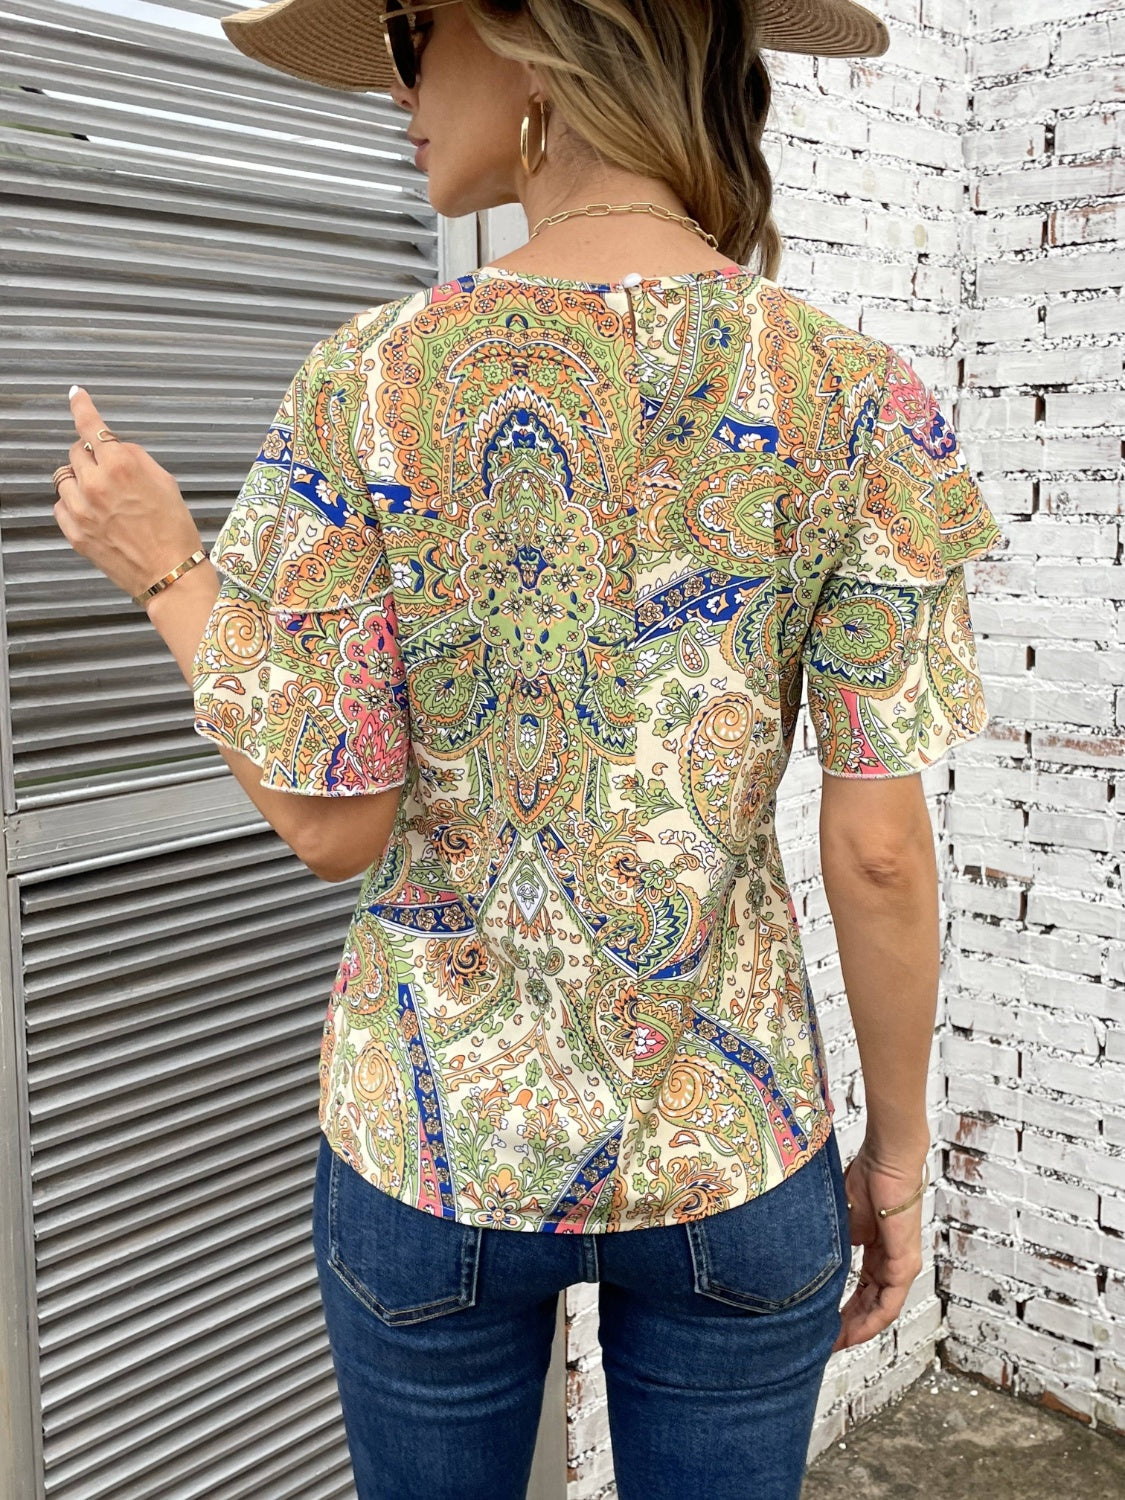 Printed Round Neck Short Sleeve Blouse Women's Top